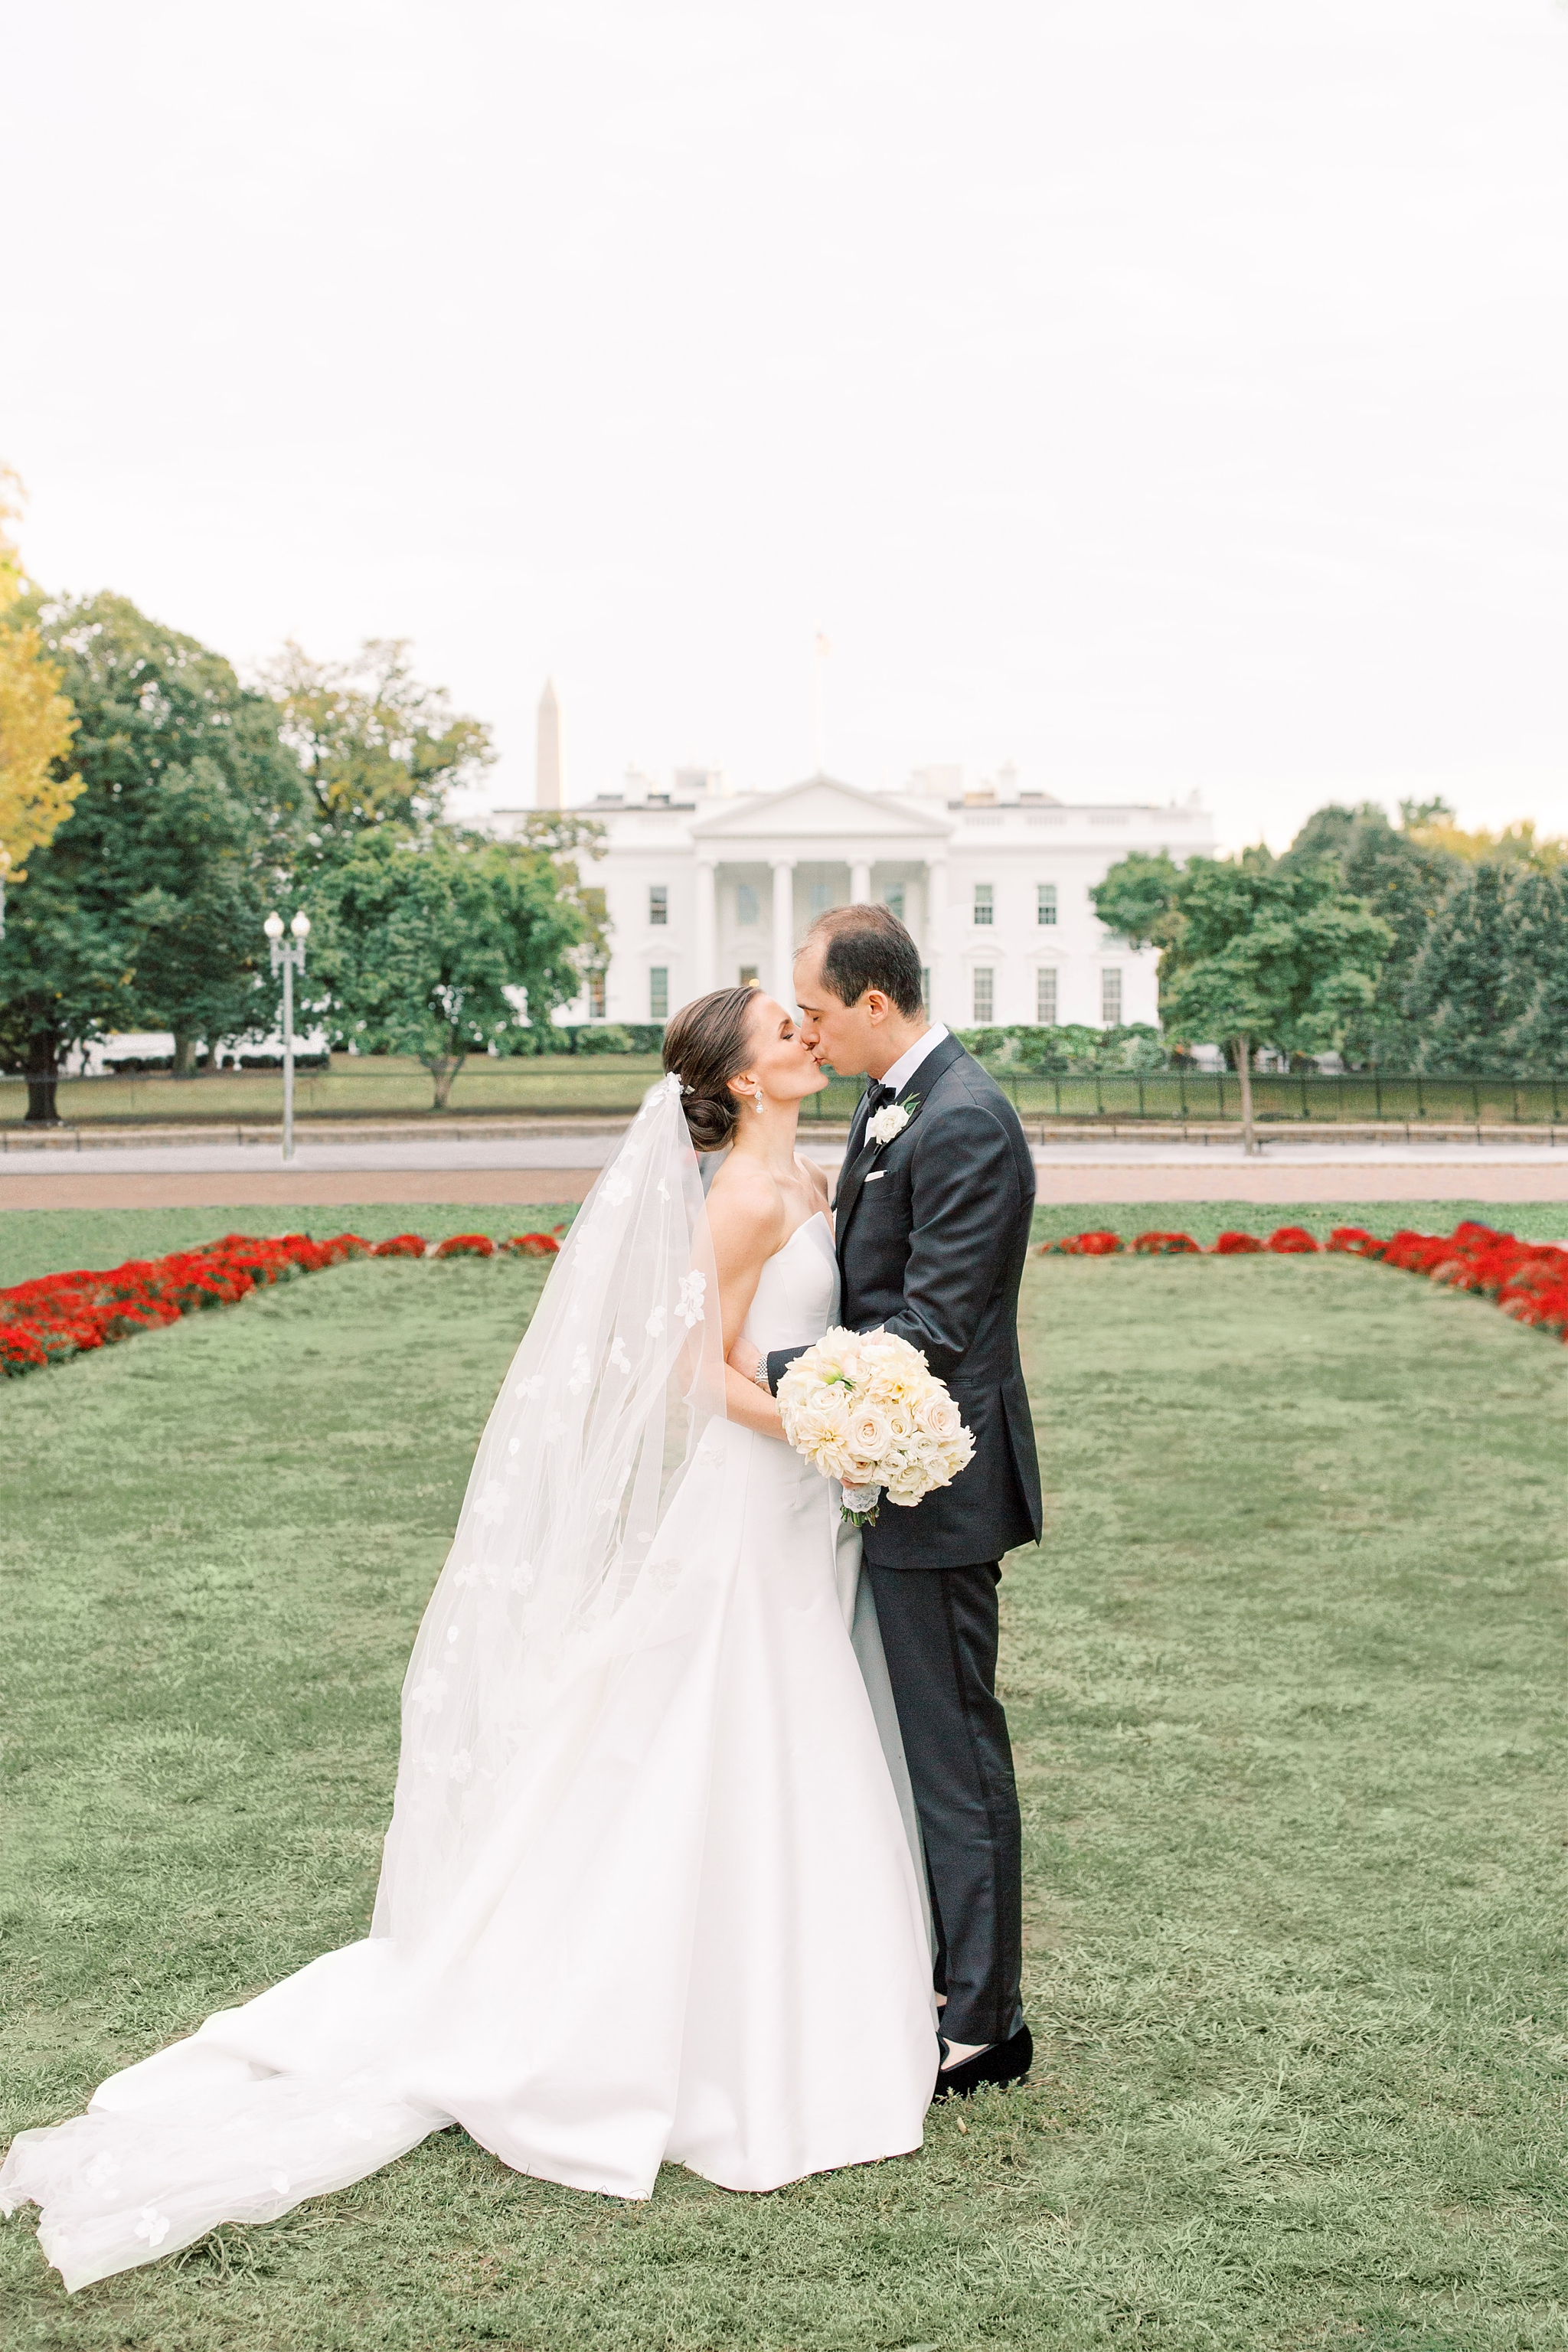 This classic black tie wedding is held at the iconic Army Navy Club in Washington, DC.